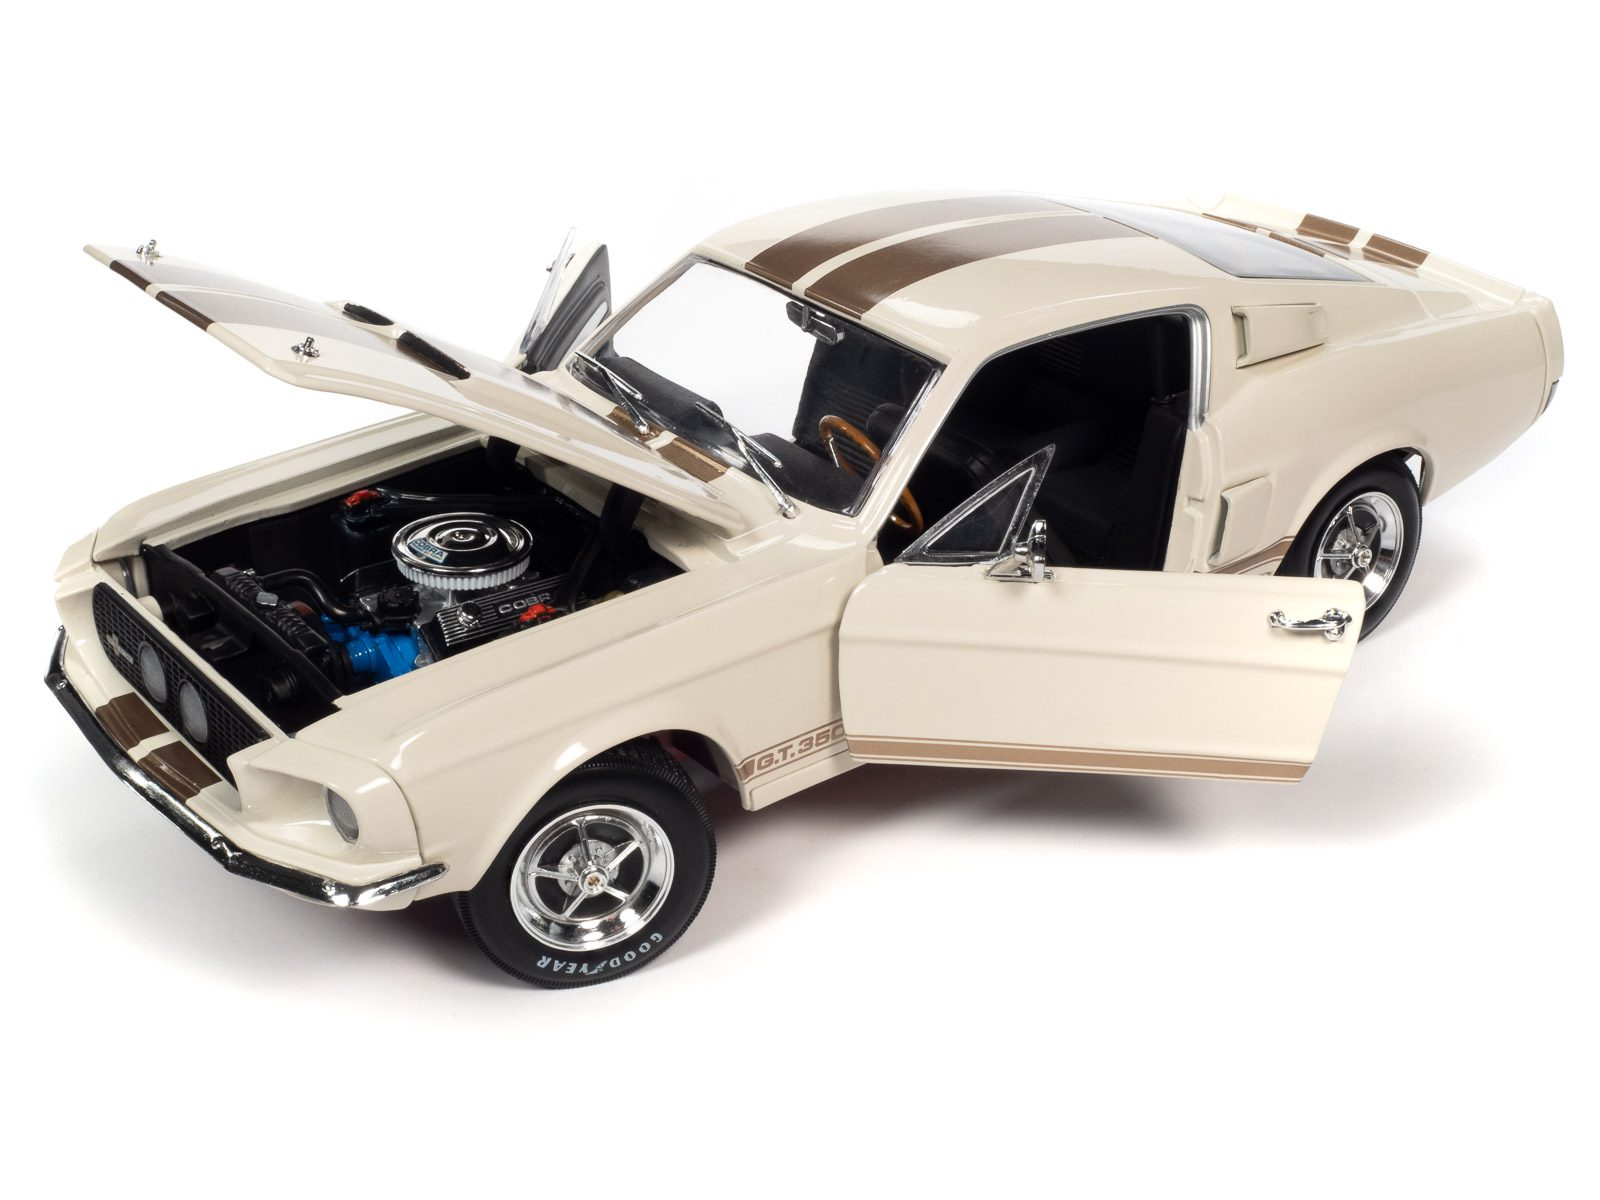 FORD MUSTANG SHELBY GT-350 1967 AUTO WORLD 1/18°